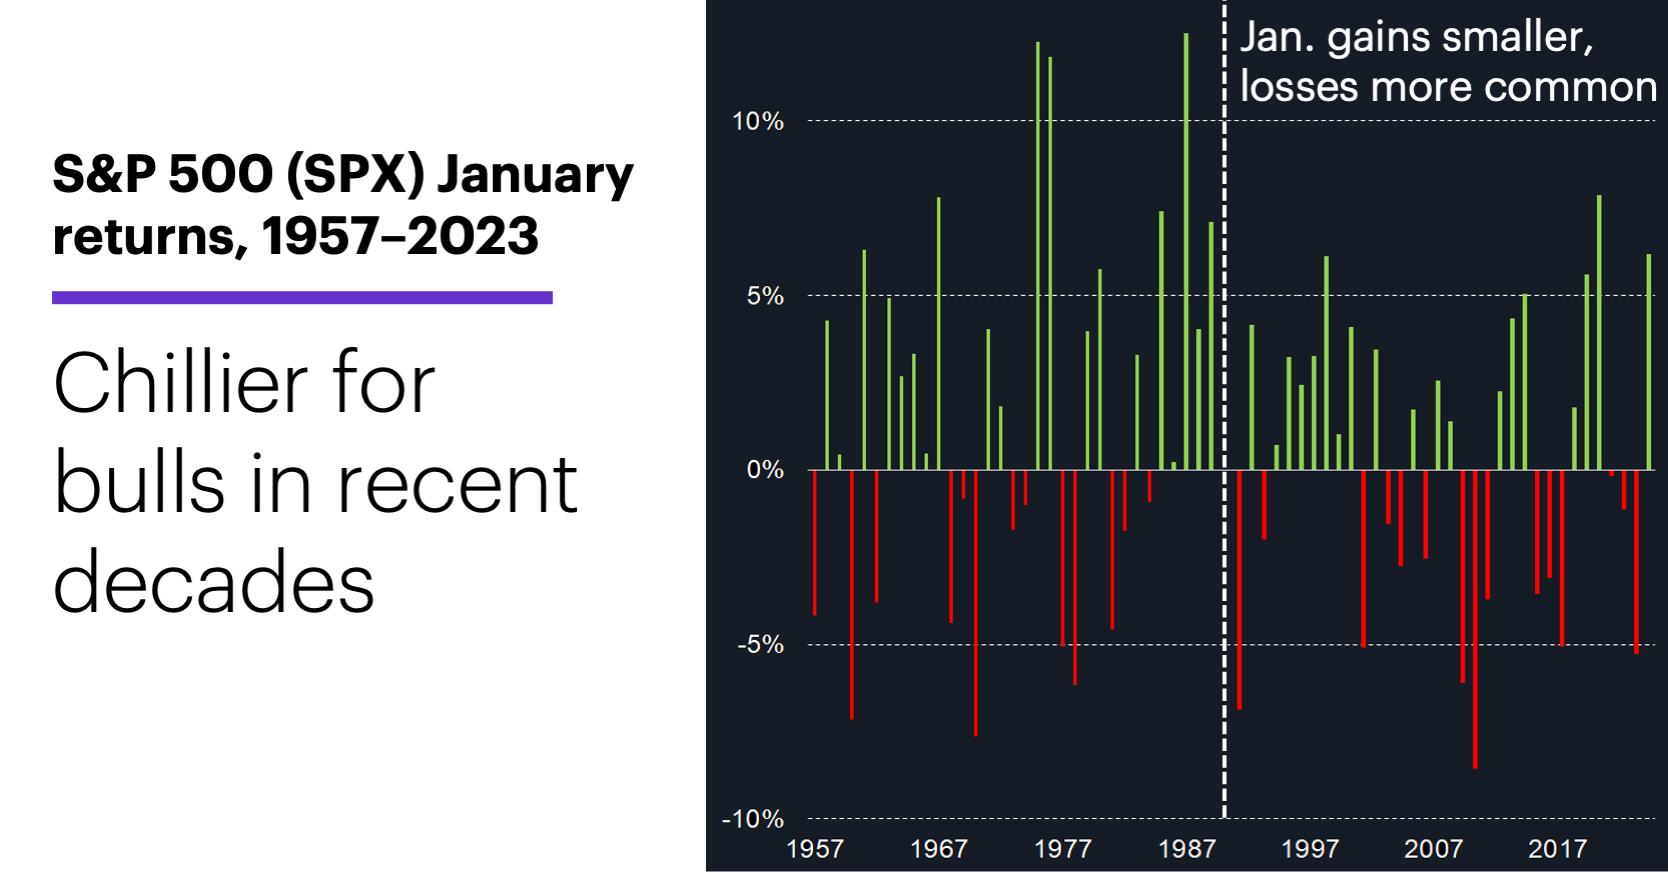 Chart 1: S&P 500 (SPX) January returns, 1957–2023. Chillier for bulls in recent decades.